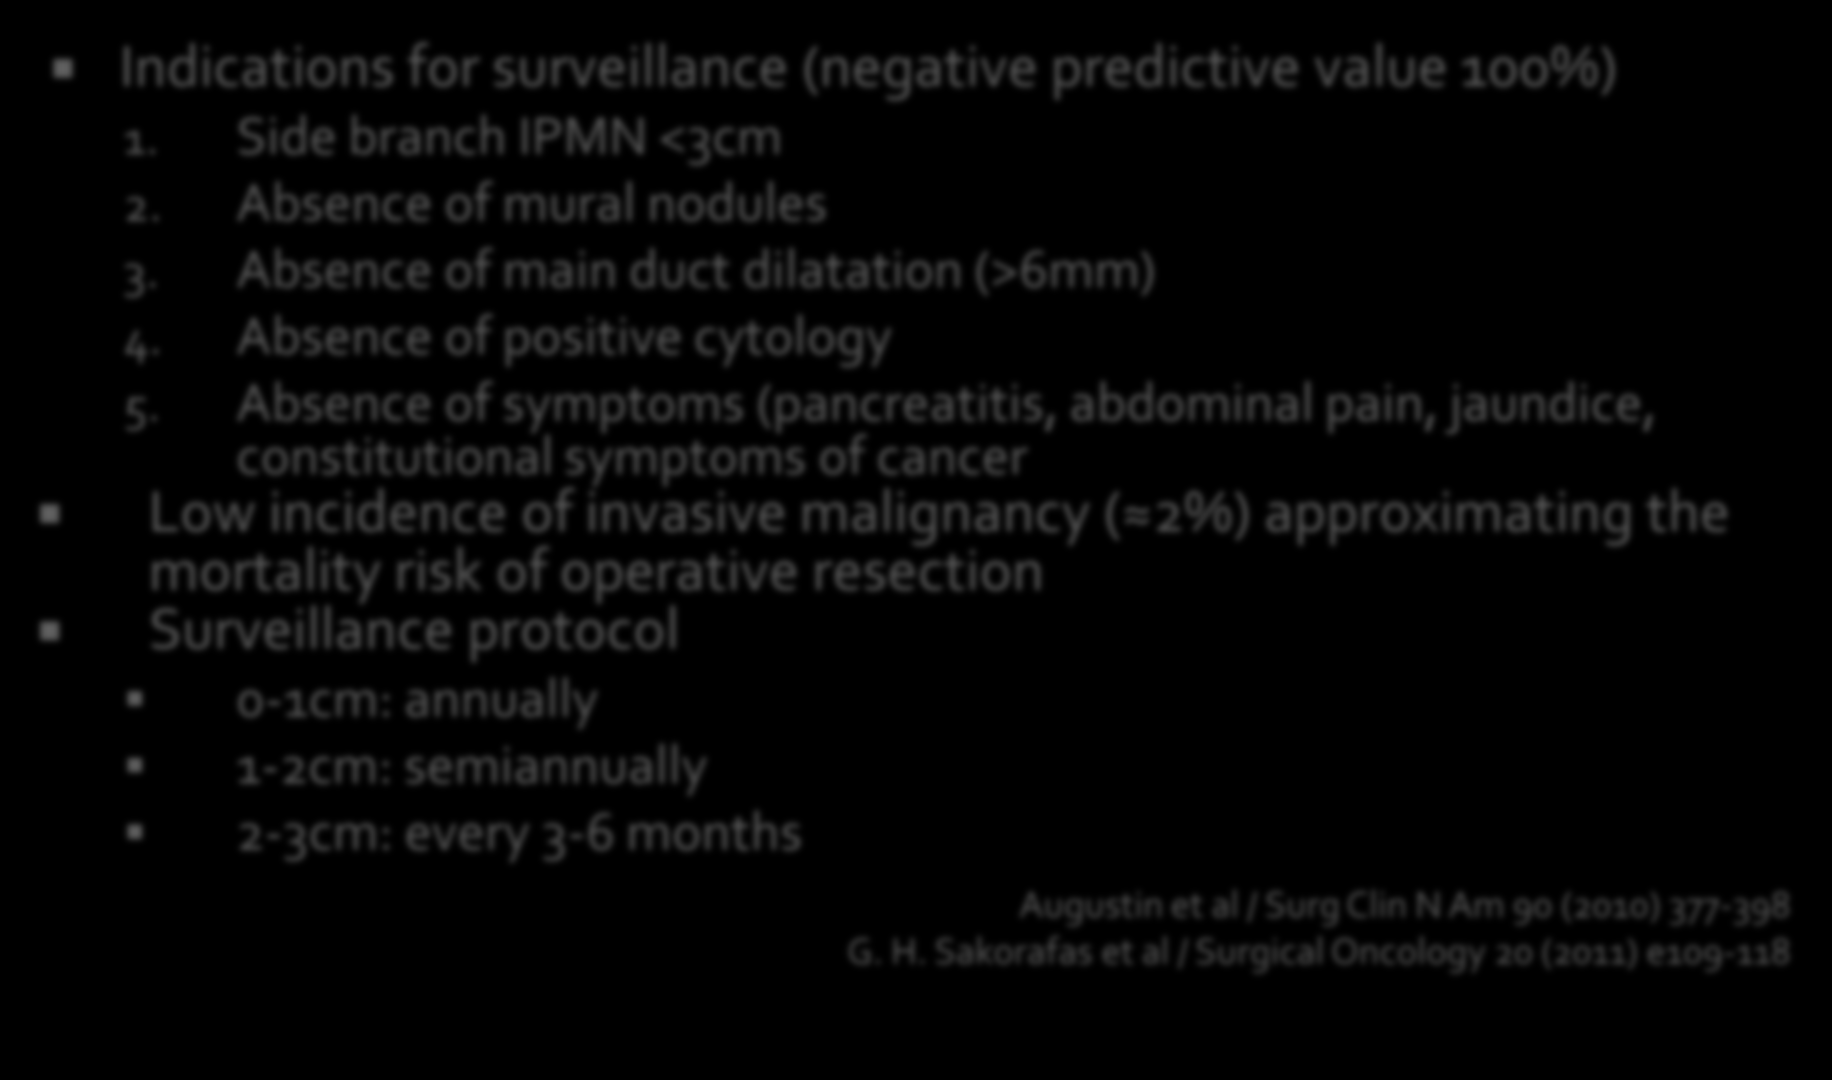 Indications for surveillance (negative predictive value 100%) 1. Side branch IPMN <3cm 2. Absence of mural nodules 3. Absence of main duct dilatation (>6mm) 4. Absence of positive cytology 5.